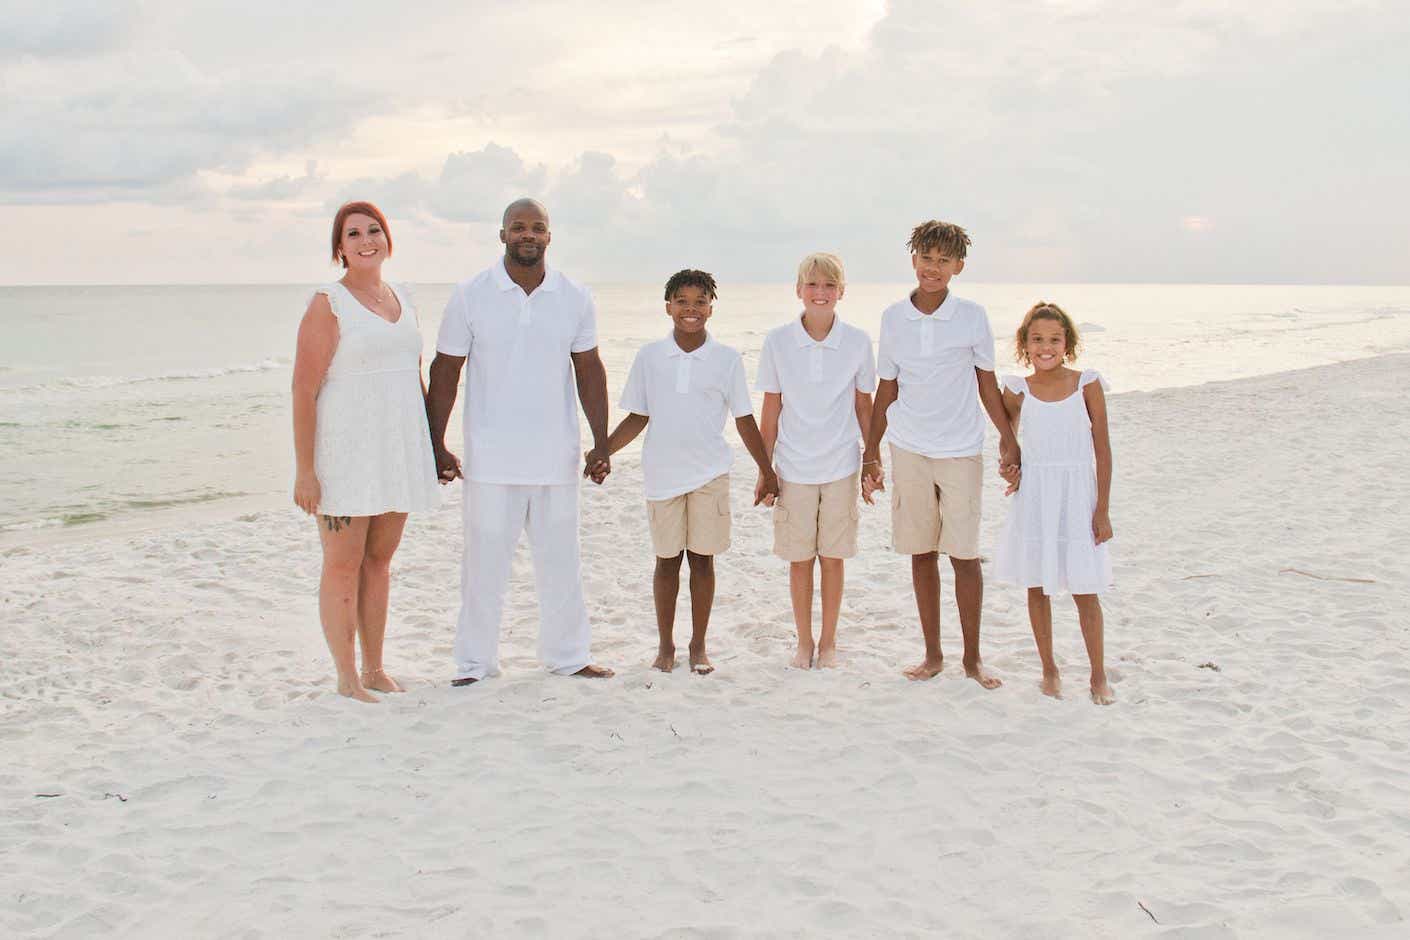 A family of six stands smiling on a white sand beach at dusk, holding hands and wearing matching white outfits.